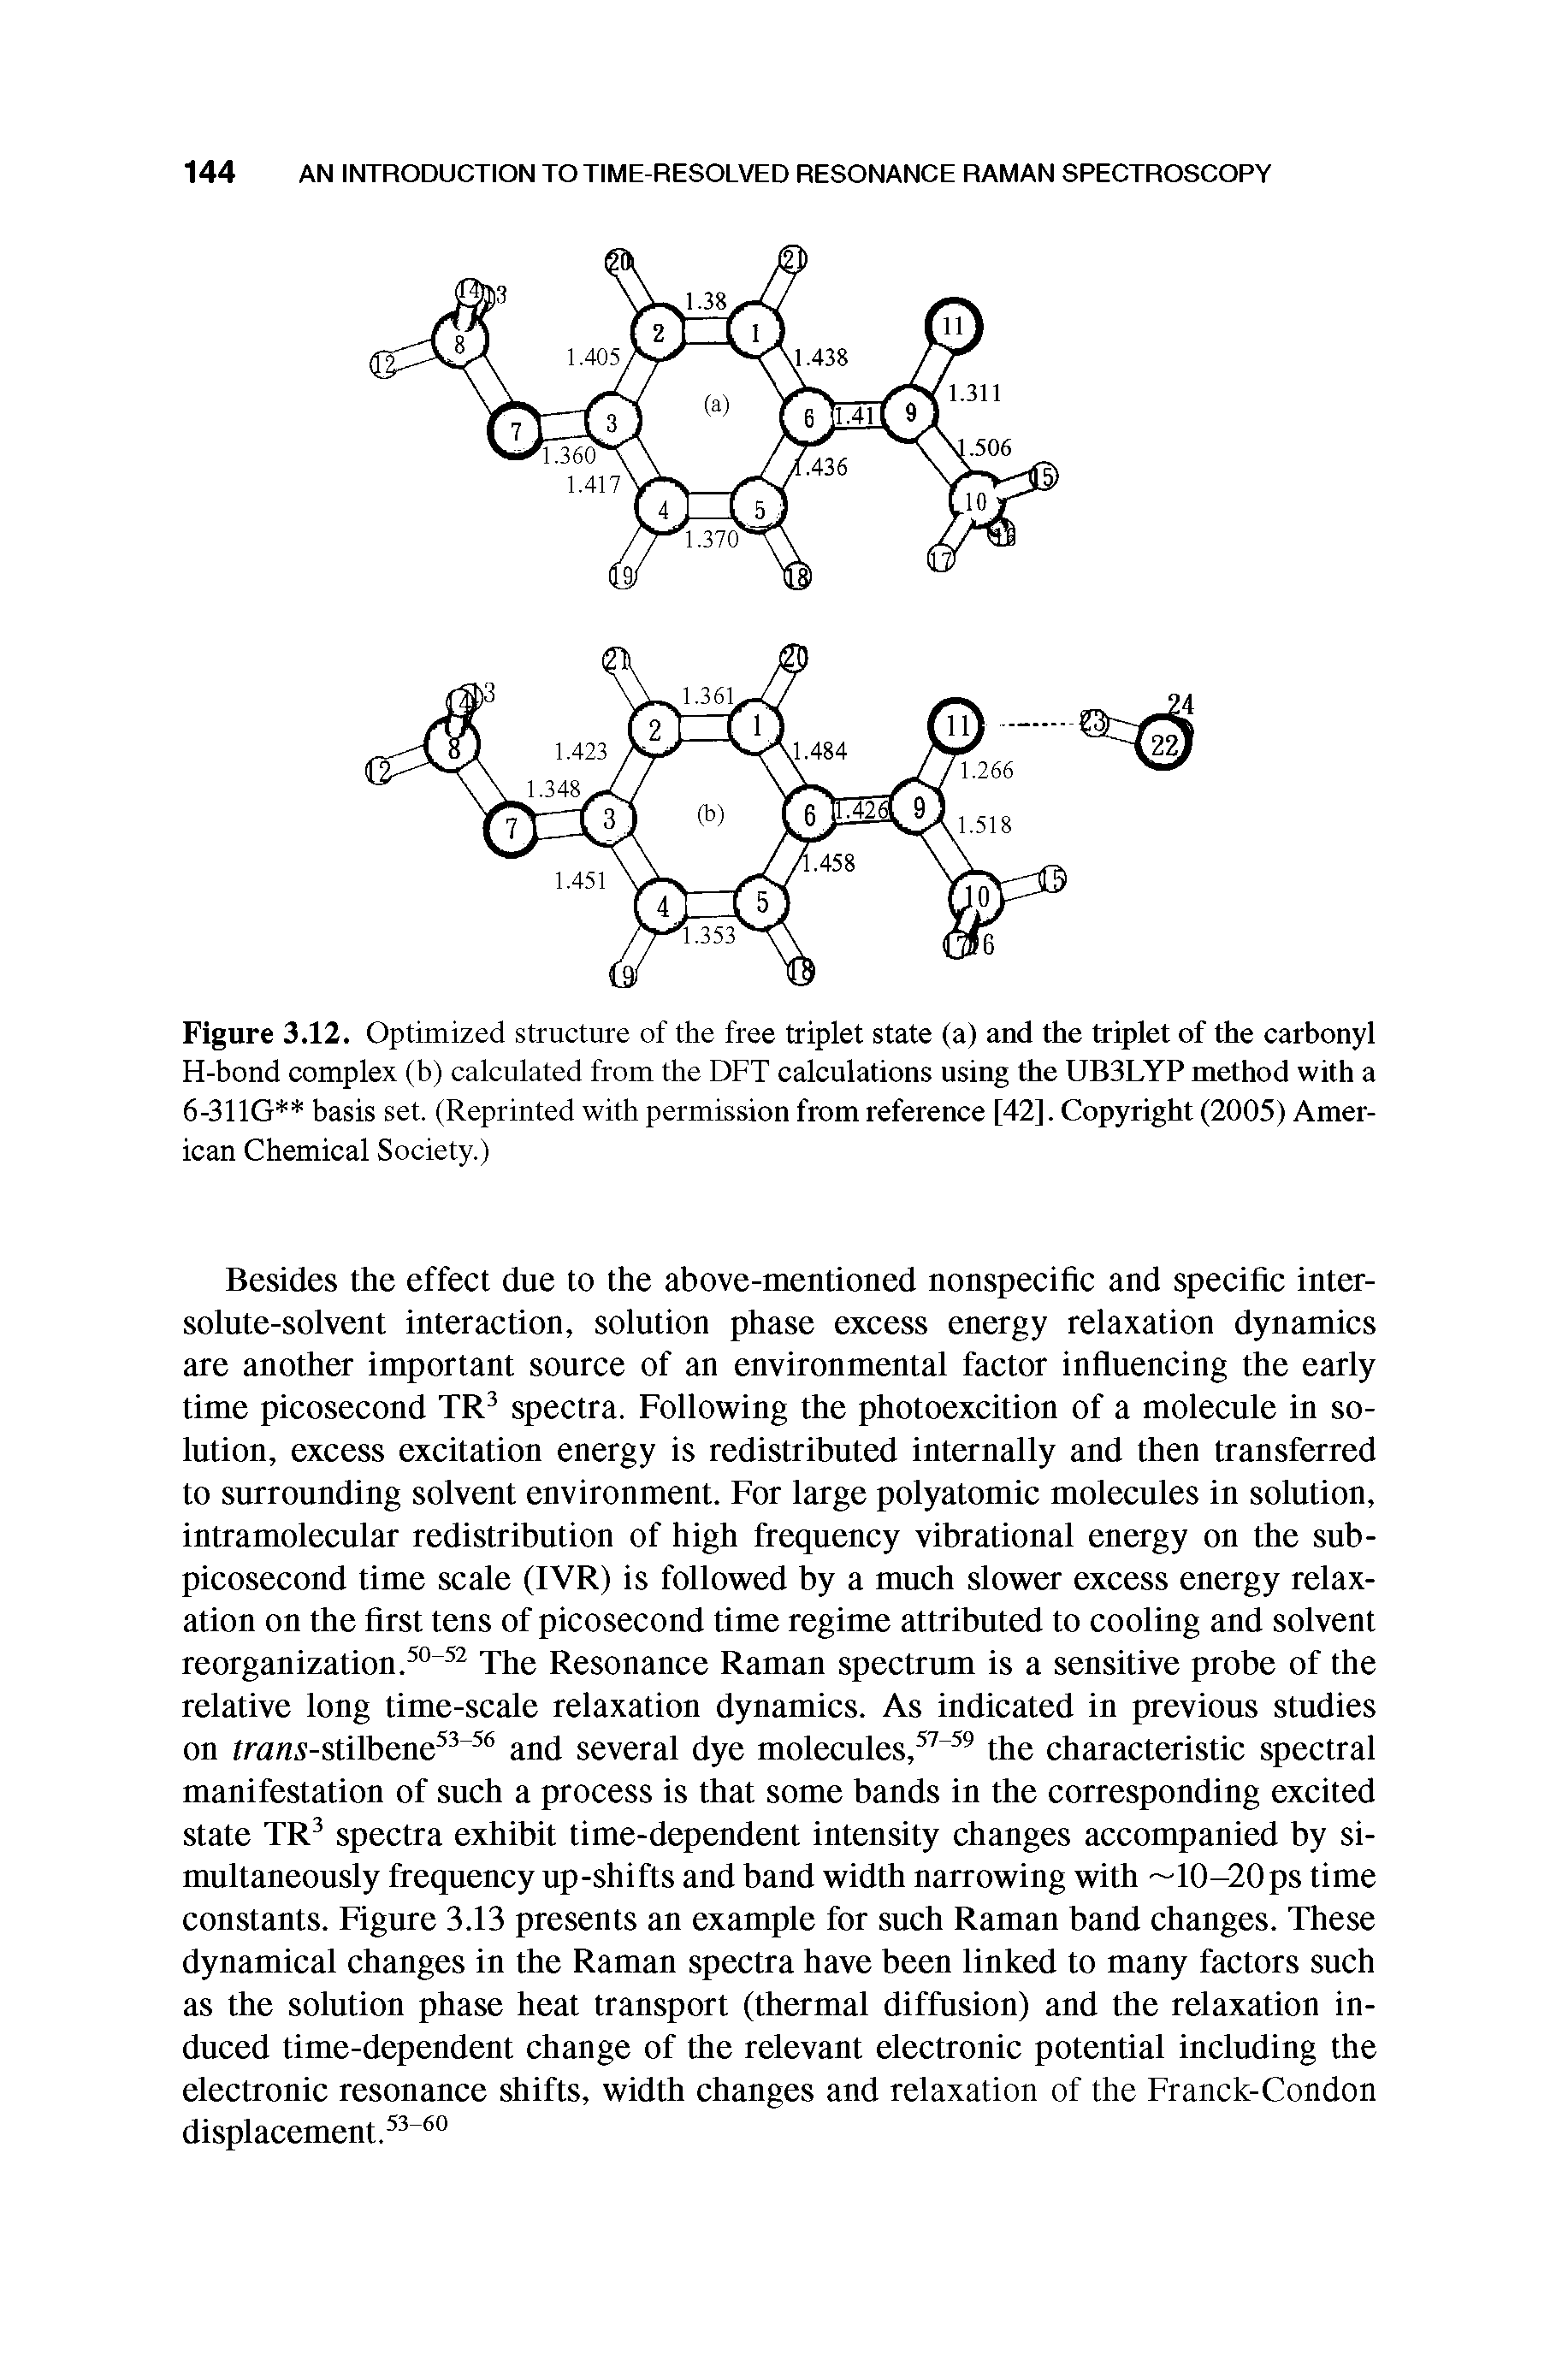 Figure 3.12. Optimized structure of the free triplet state (a) and the triplet of the carbonyl H-bond complex (b) calculated from the DPT calculations using the UB3LYP method with a 6-311G basis set. (Reprinted with permission from reference [42]. Copyright (2005) American Chemical Society.)...